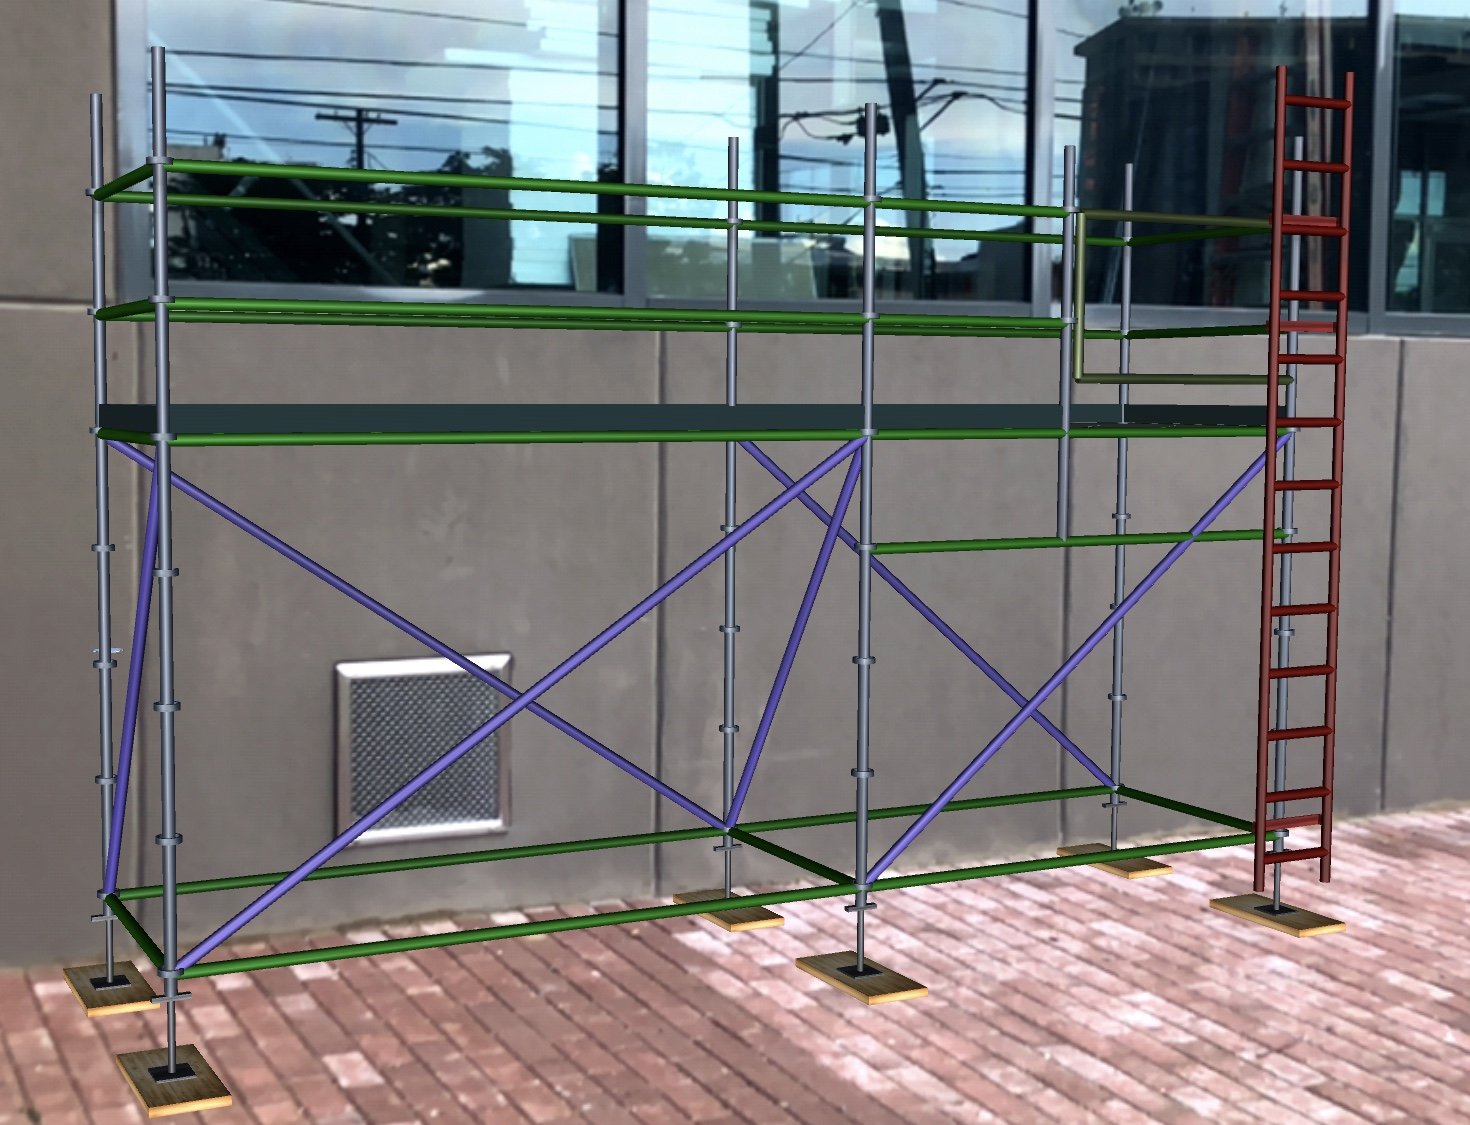 3D drawing in augmented reality as seen through Scaffold Viewer.